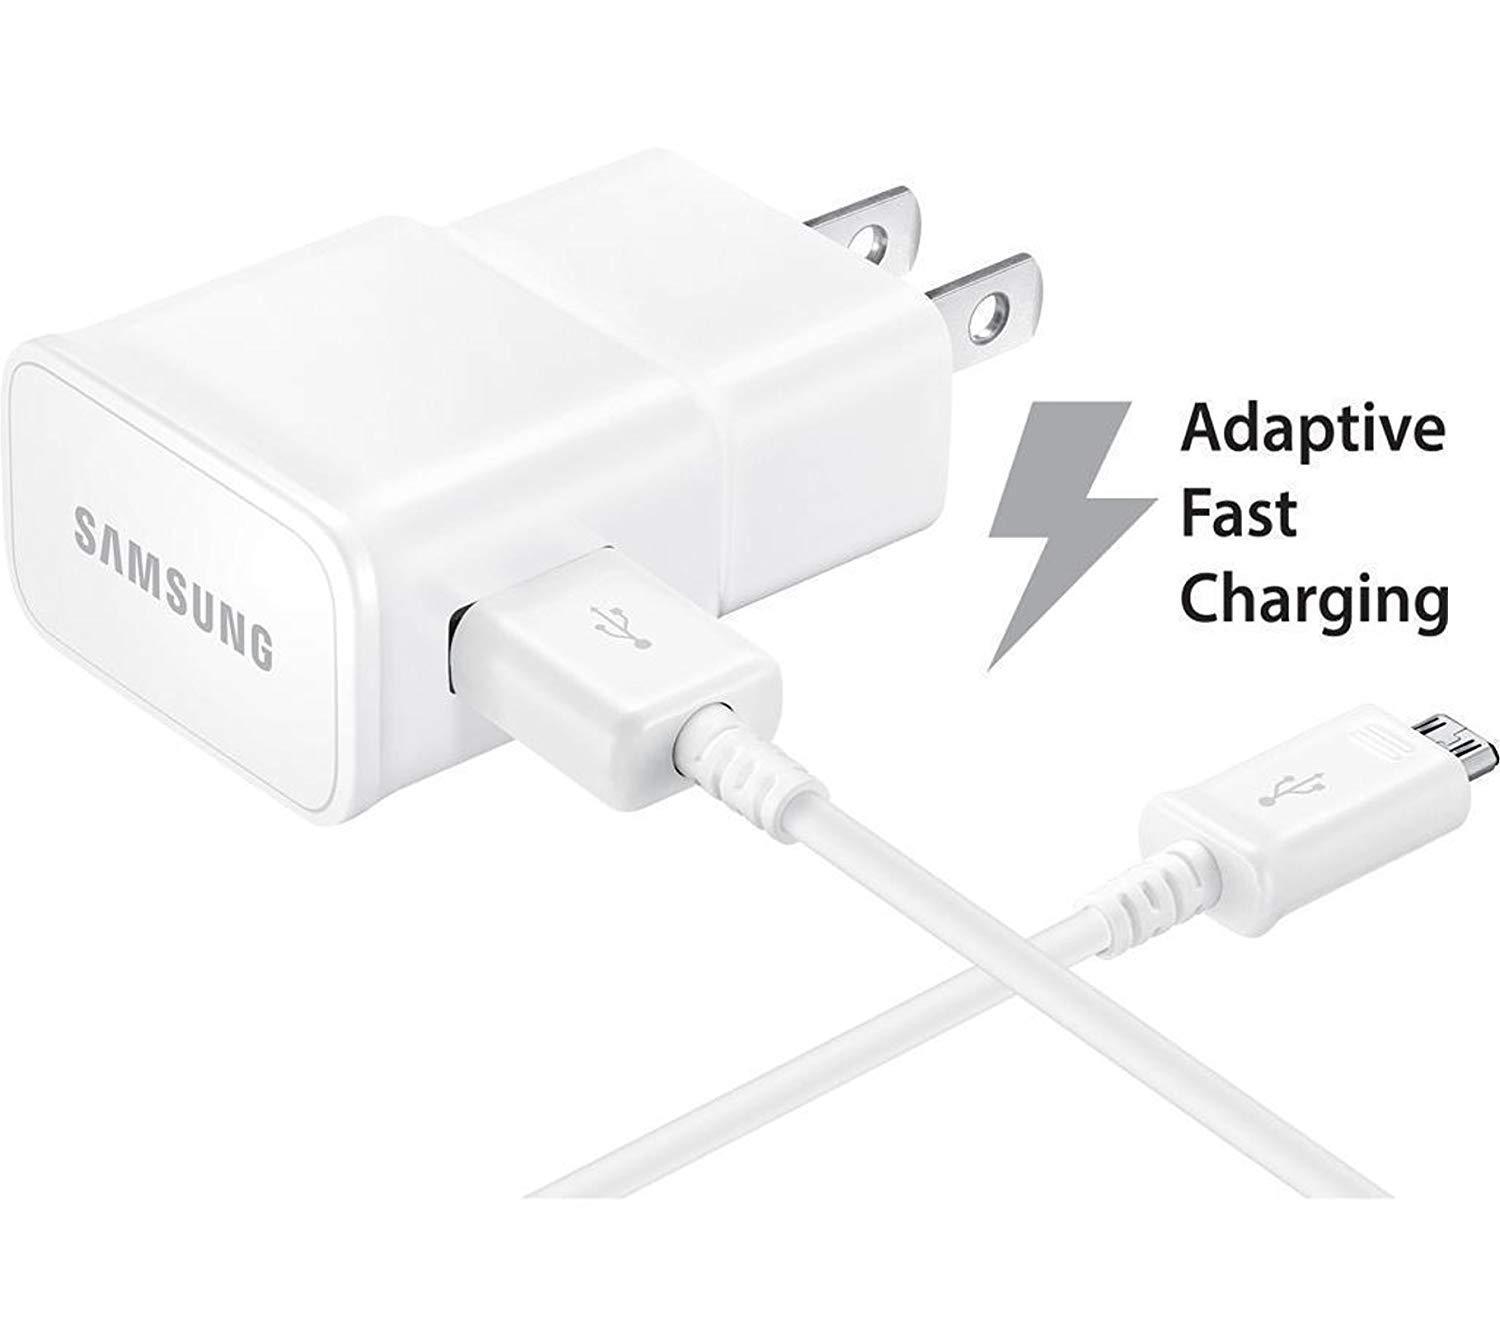 Adaptive Fast Charger Compatible with LG G4 Beat [Wall Charger + 5 Feet USB Cable] WHITE - New - image 1 of 1